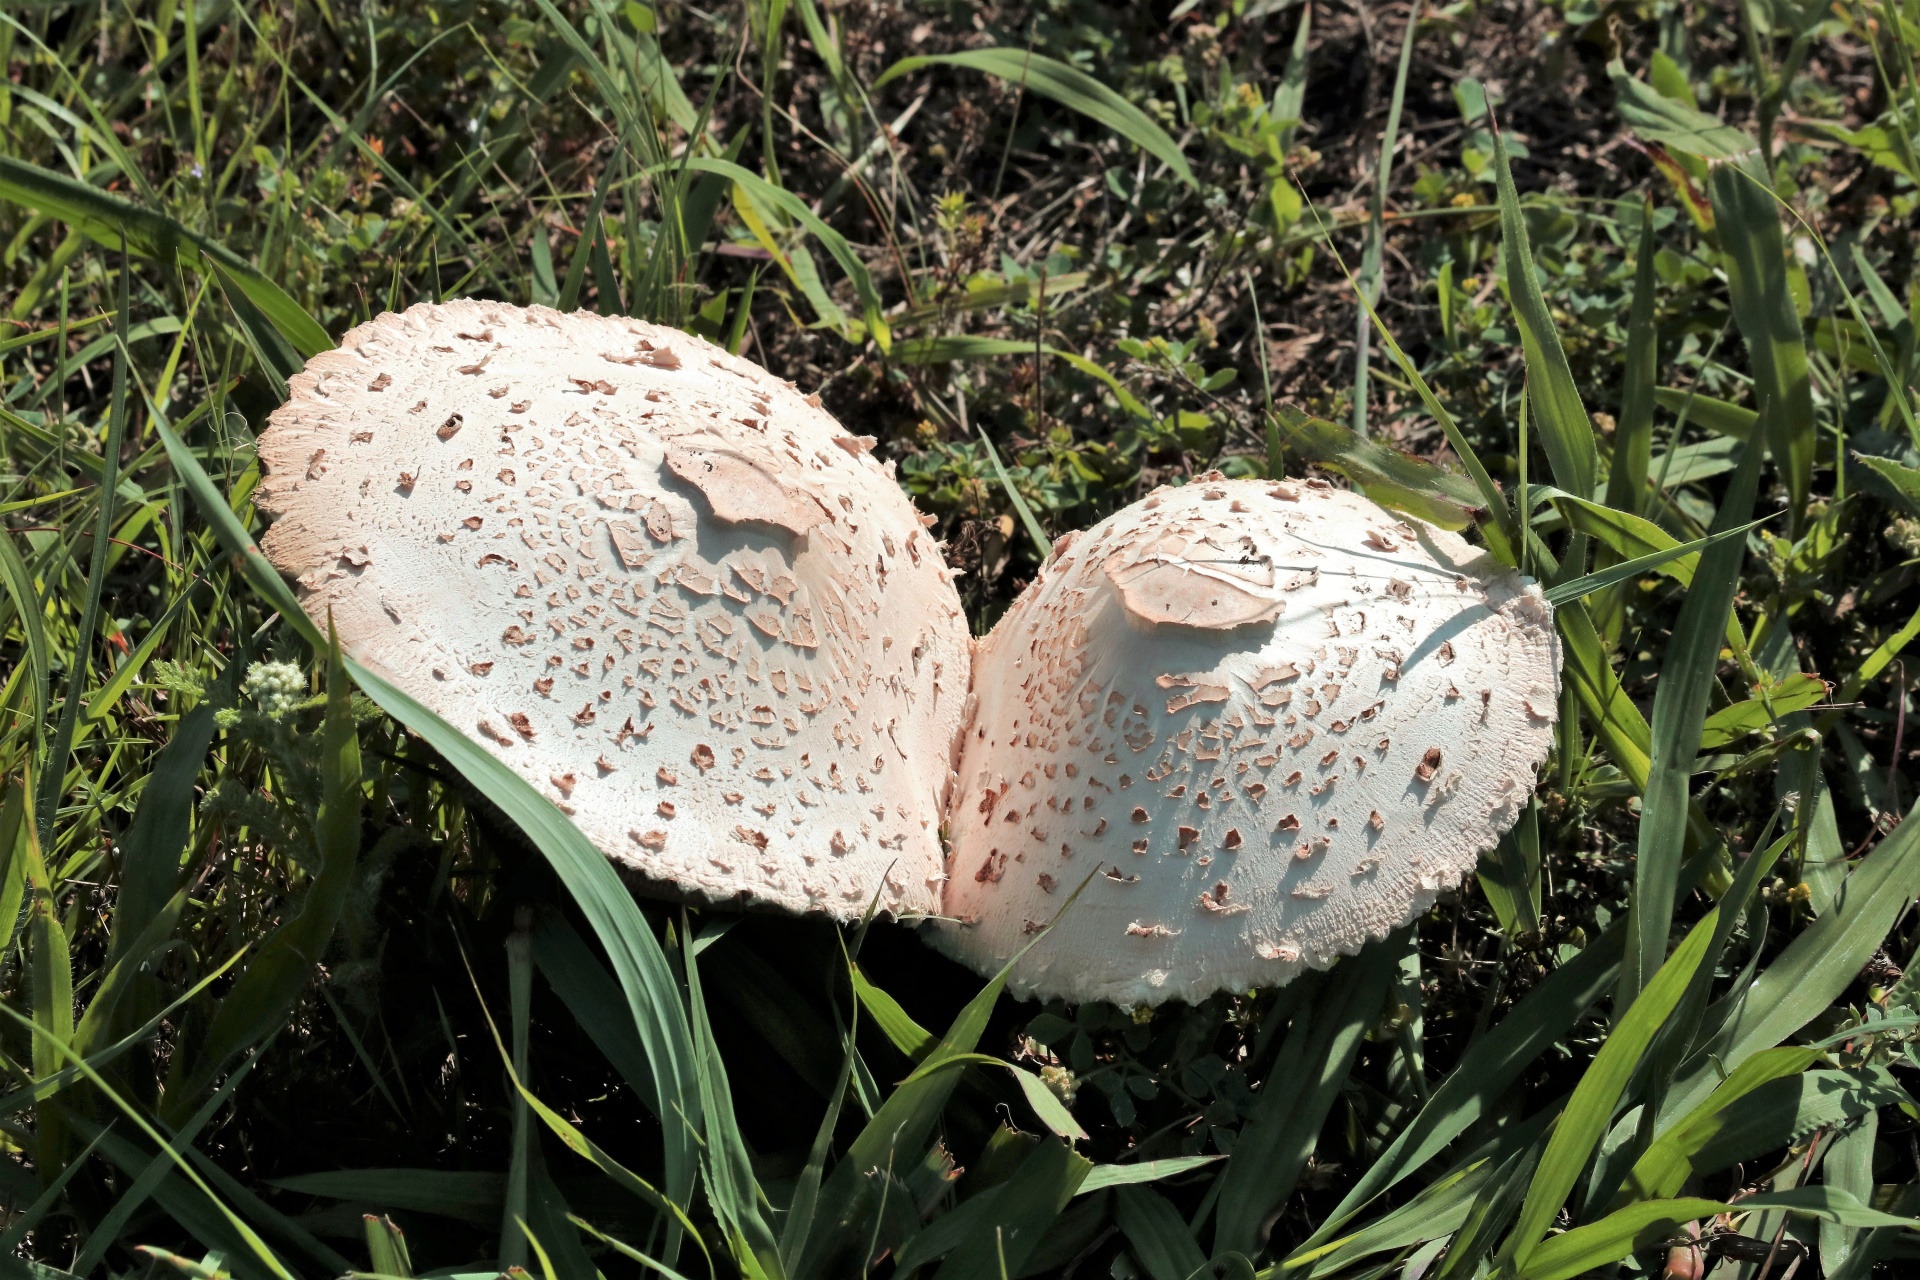 Two large white Amanita mushrooms, leaning into each other, surrounded by green grass.